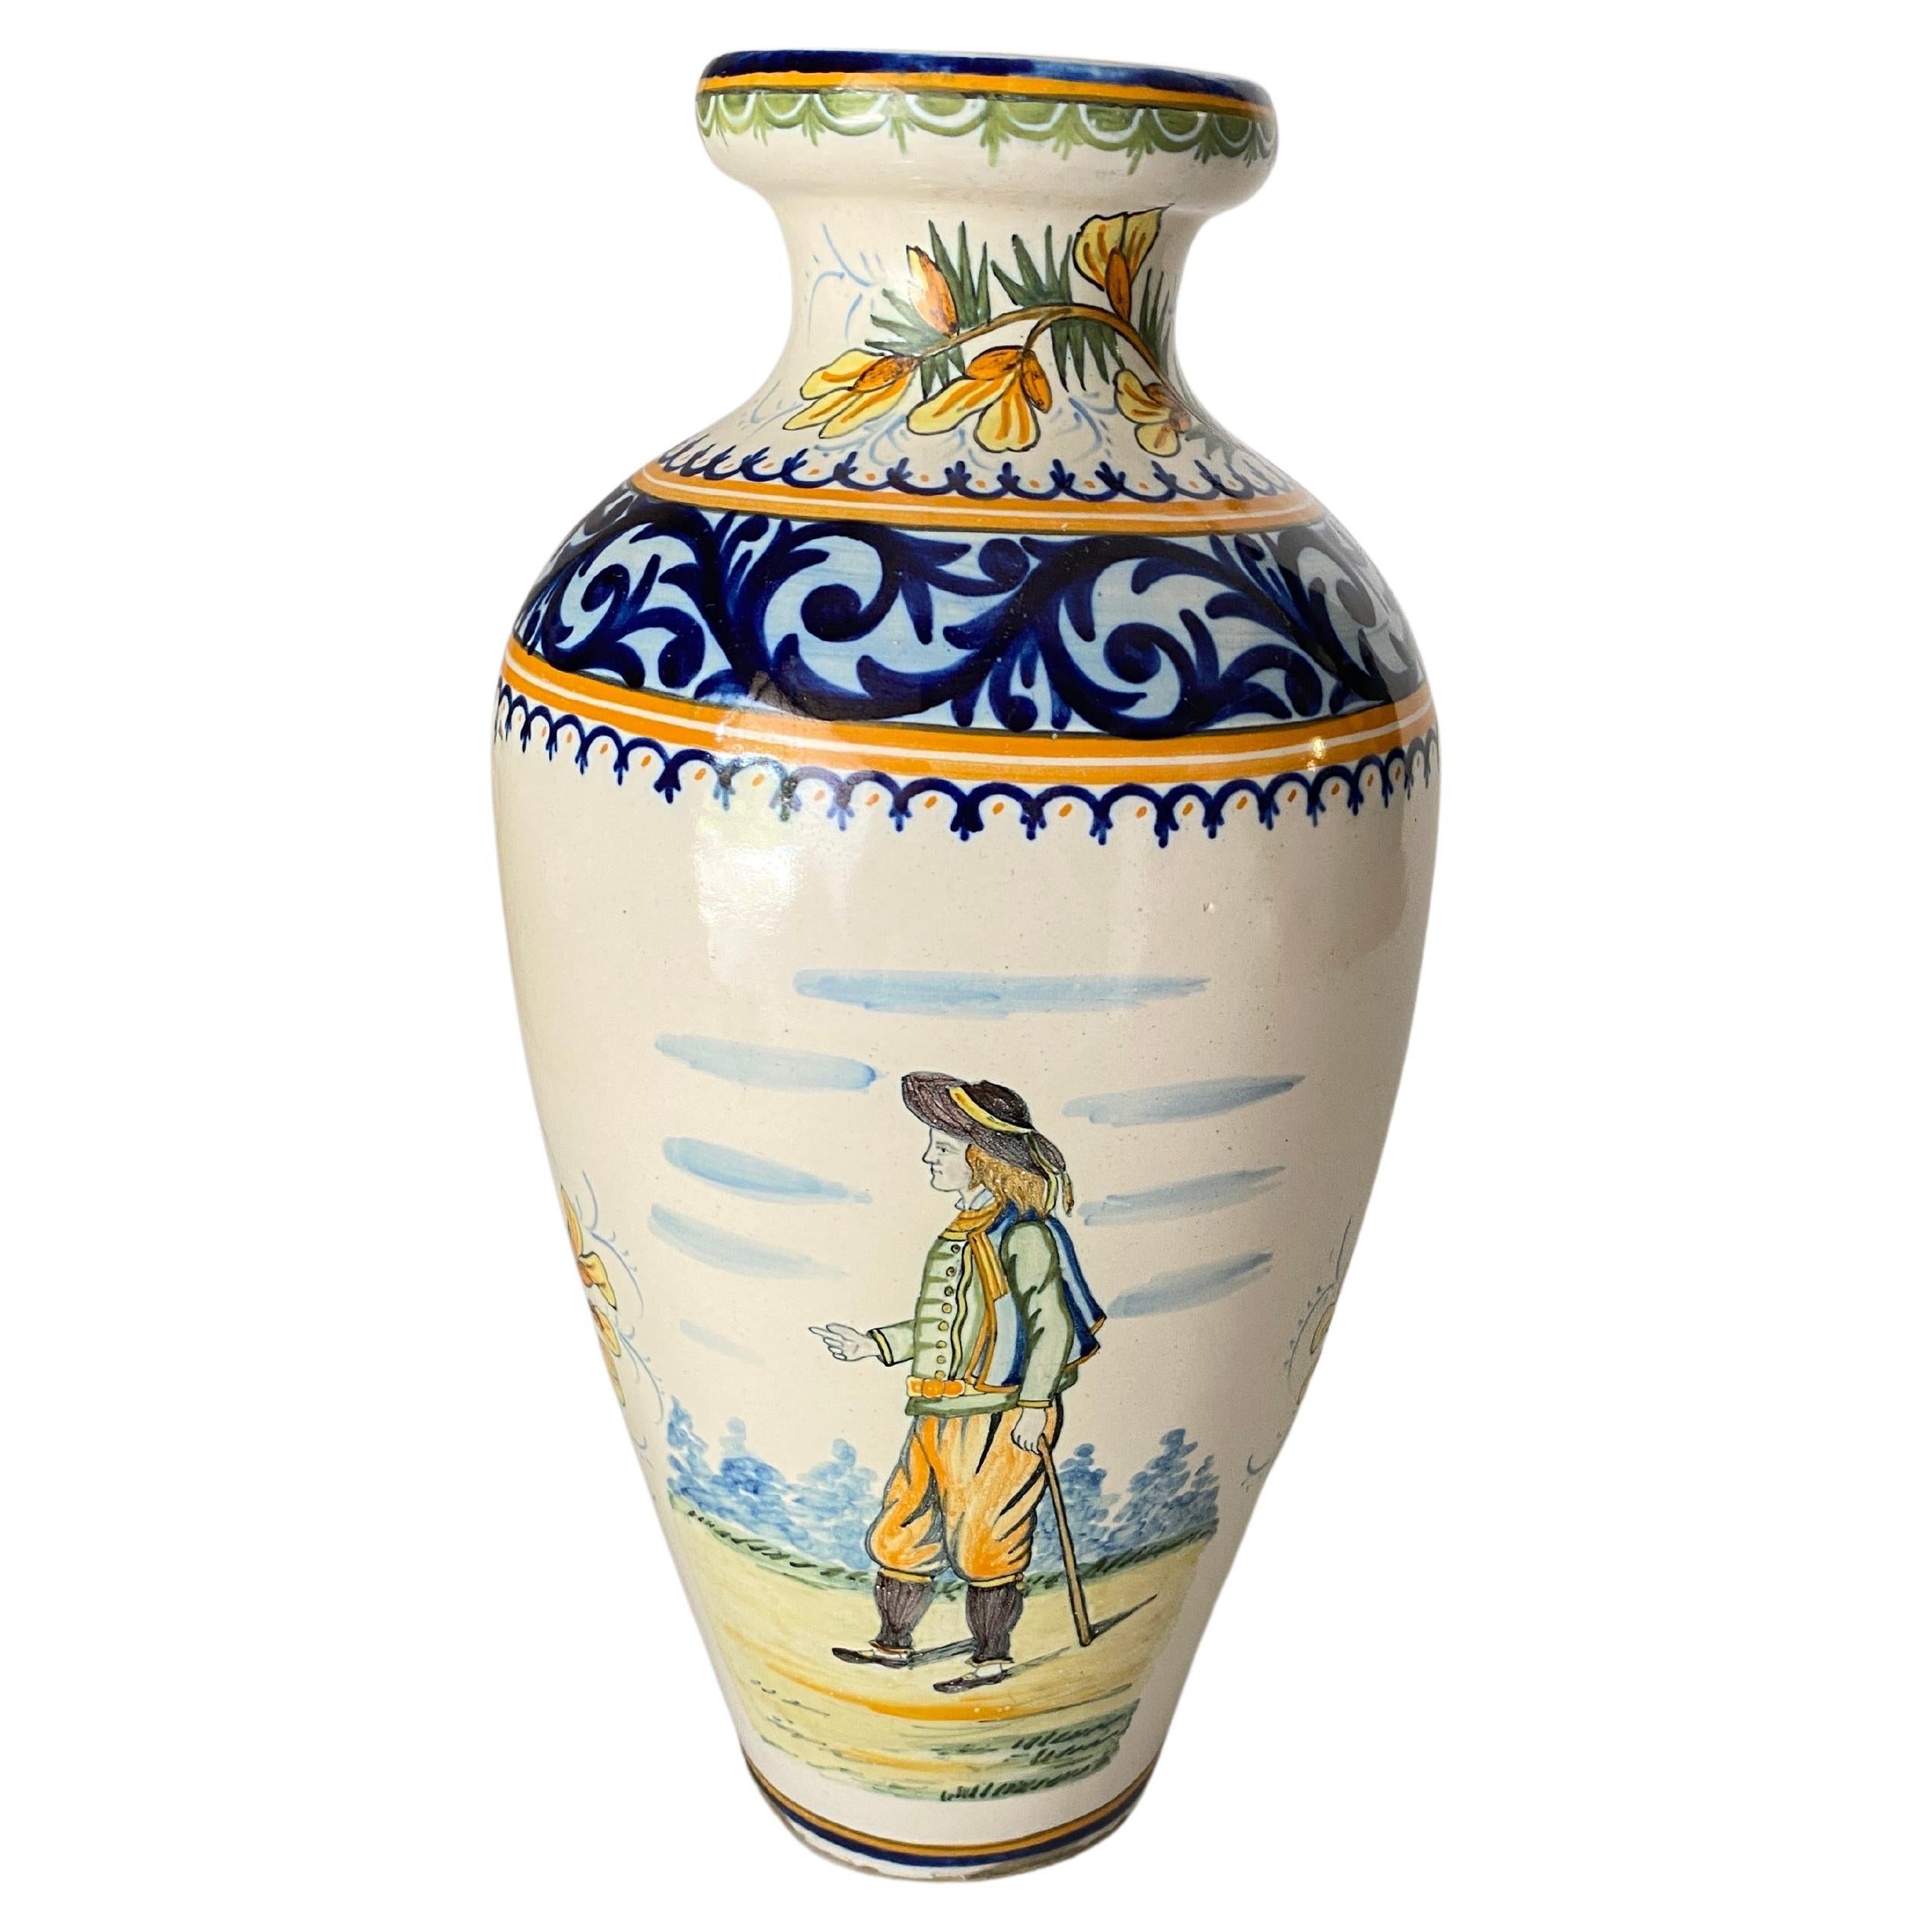 19th Century French Hand-Painted Faience Vase Signed Henriot Quimper